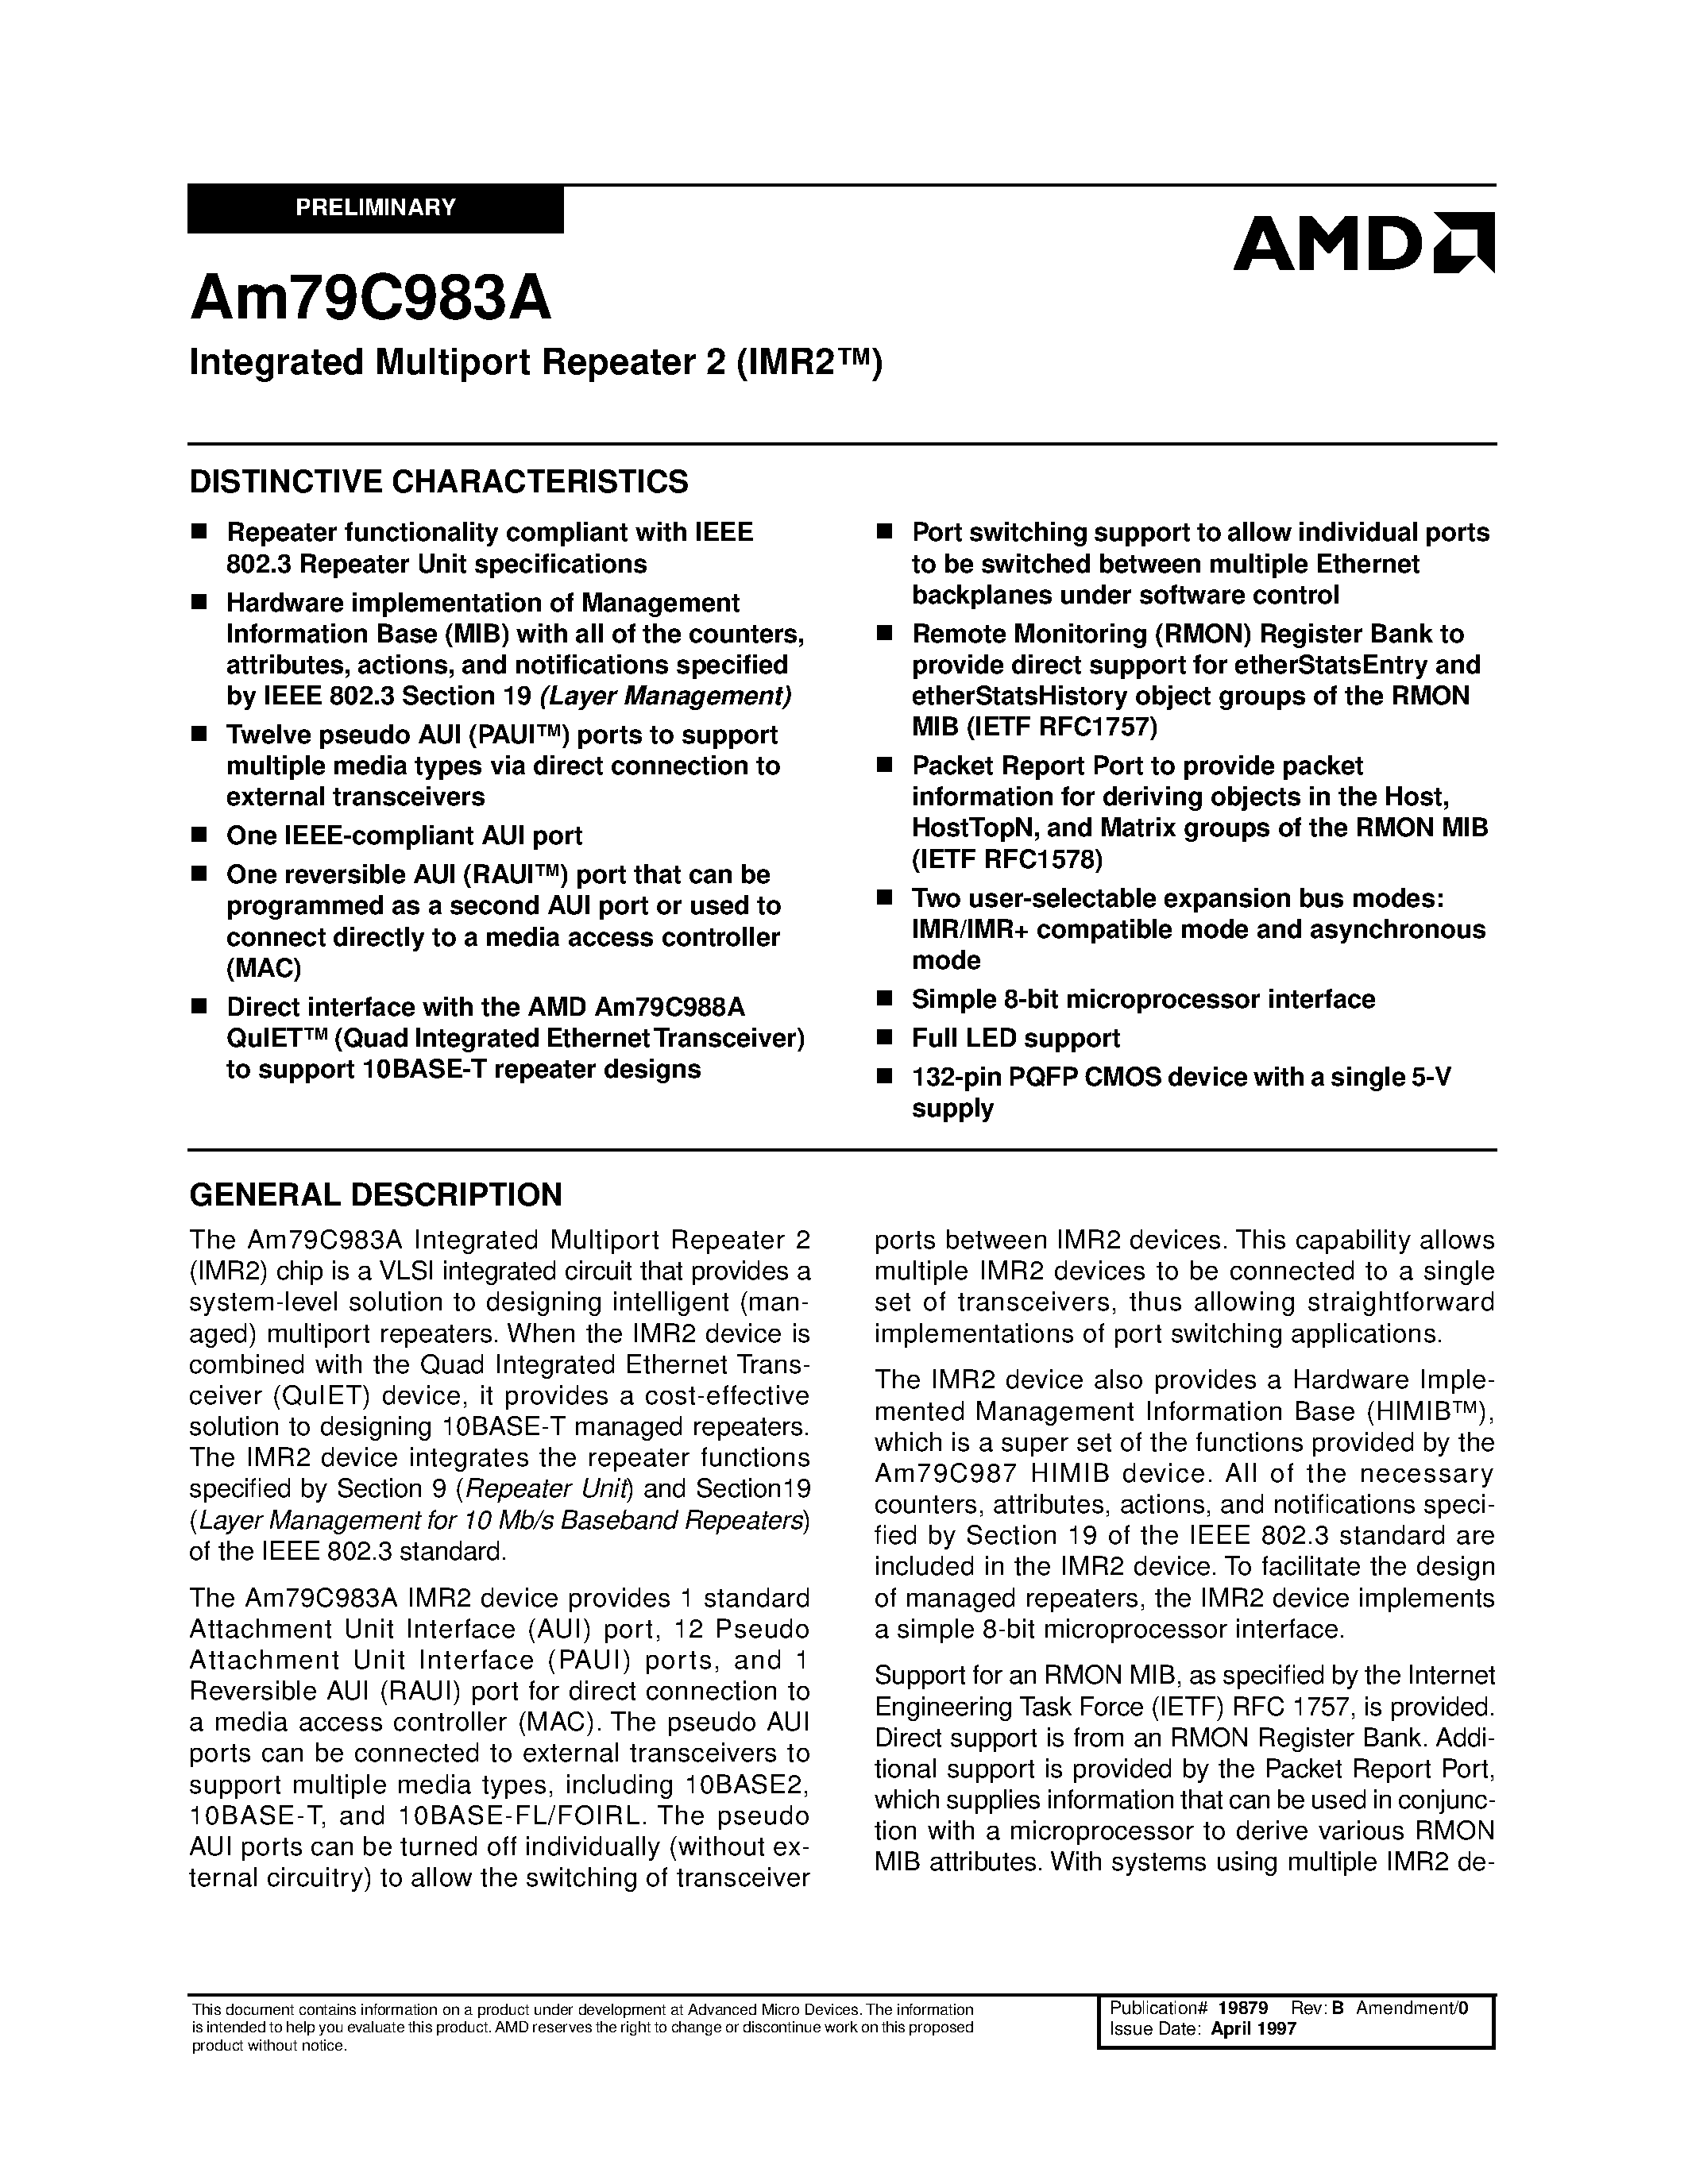 Datasheet Am79C983AKCW - Integrated Multiport Repeater 2 (IMR2) page 1